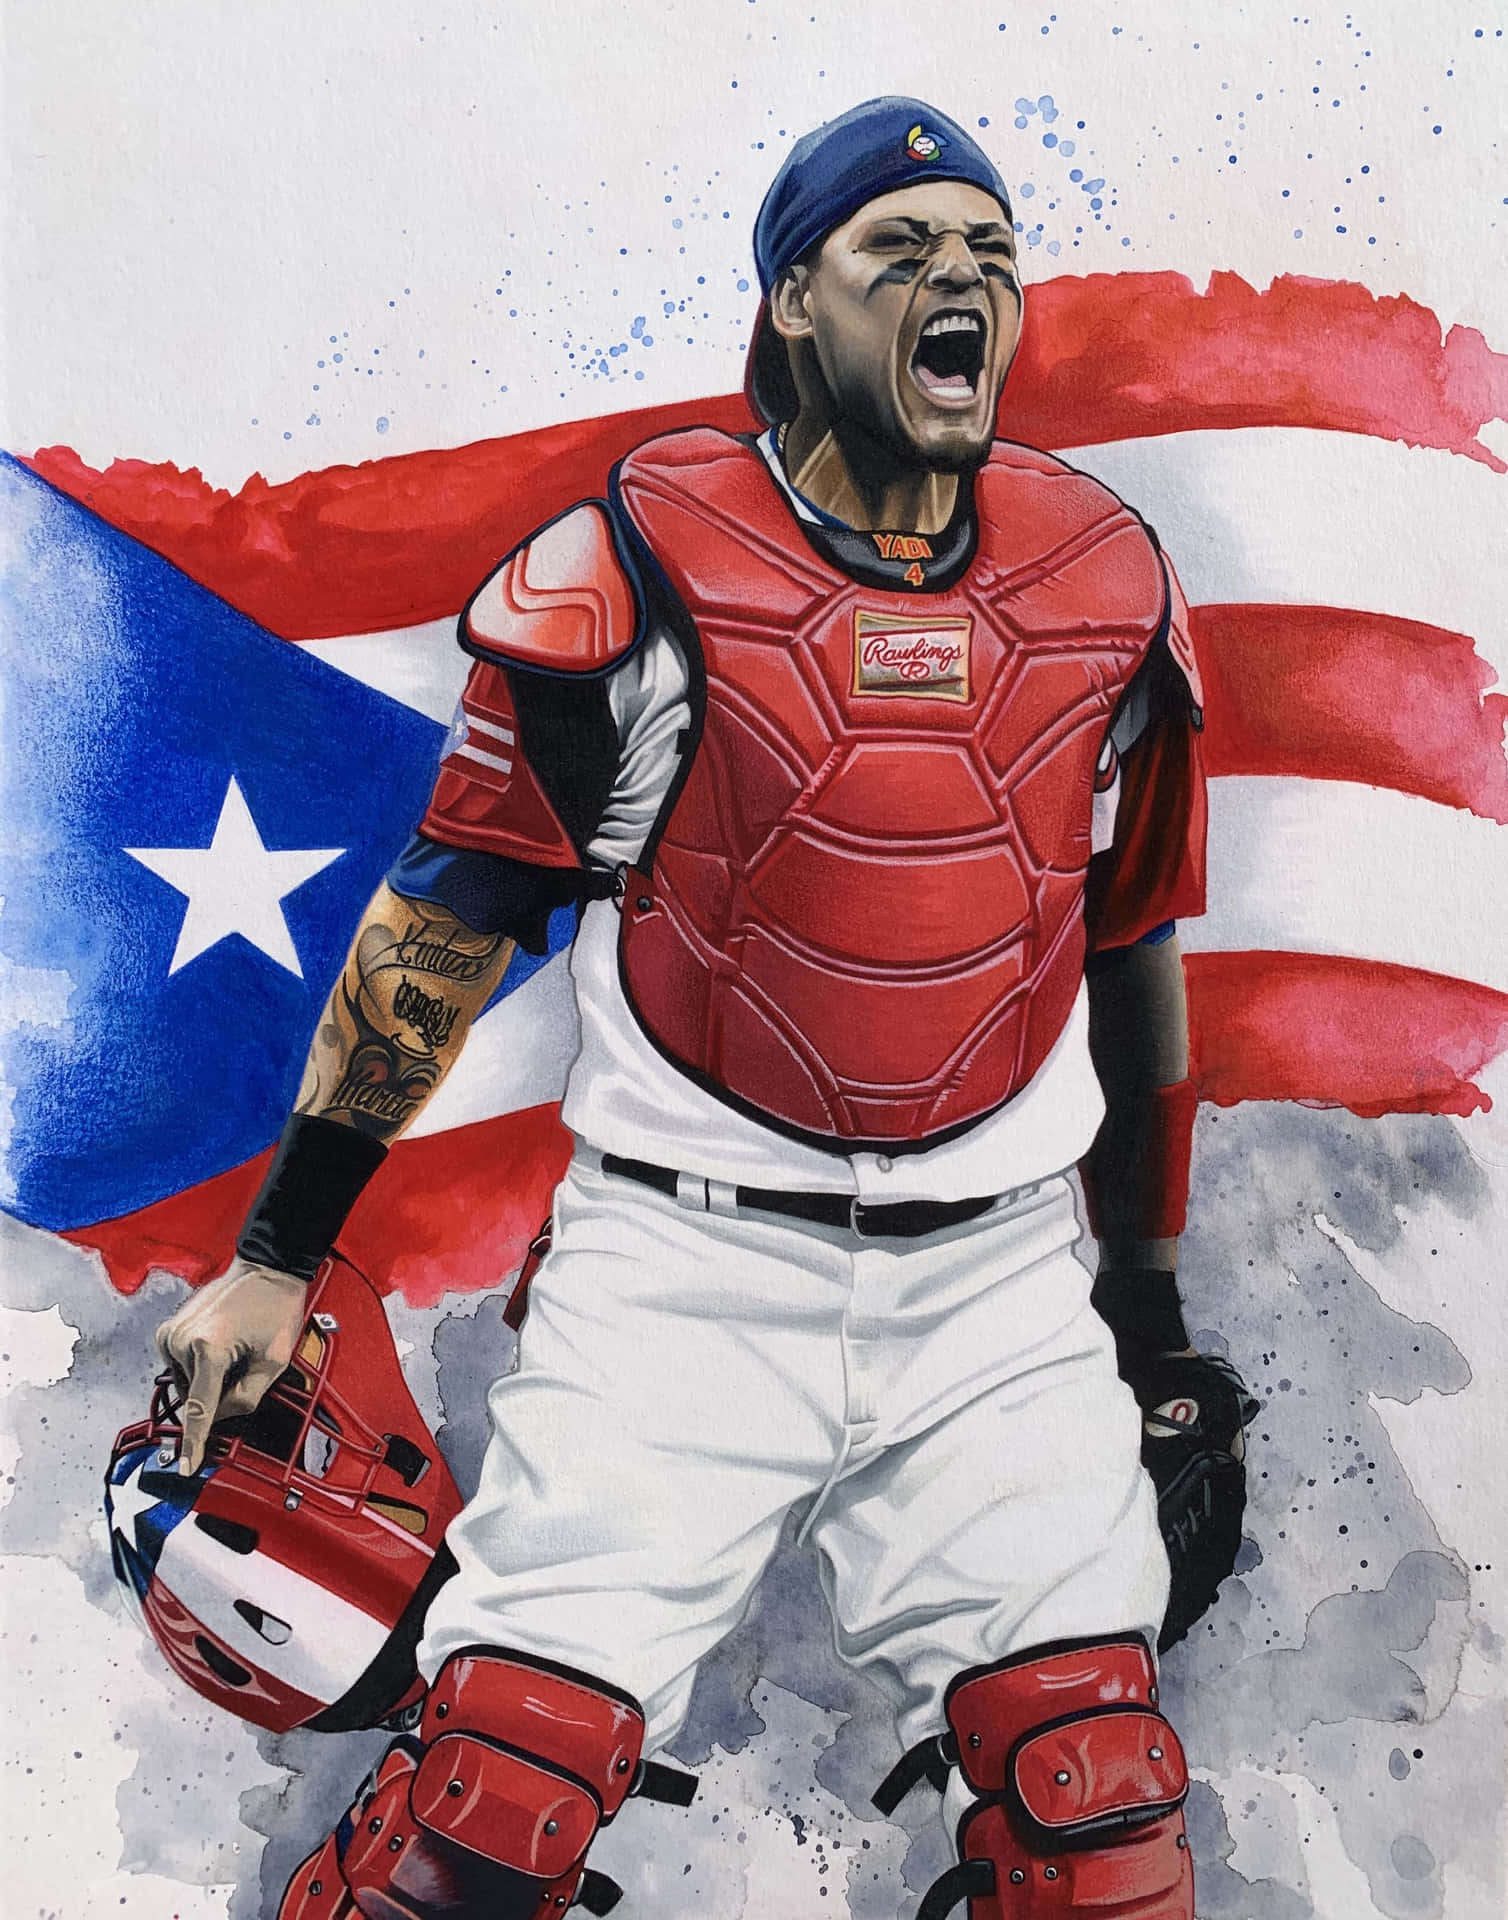 St Louis Cardinals on Twitter Show your support with these special  wallpapers SomosMLB  HispanicHeritageMonth httpstcoDQXFczLCOa   Twitter